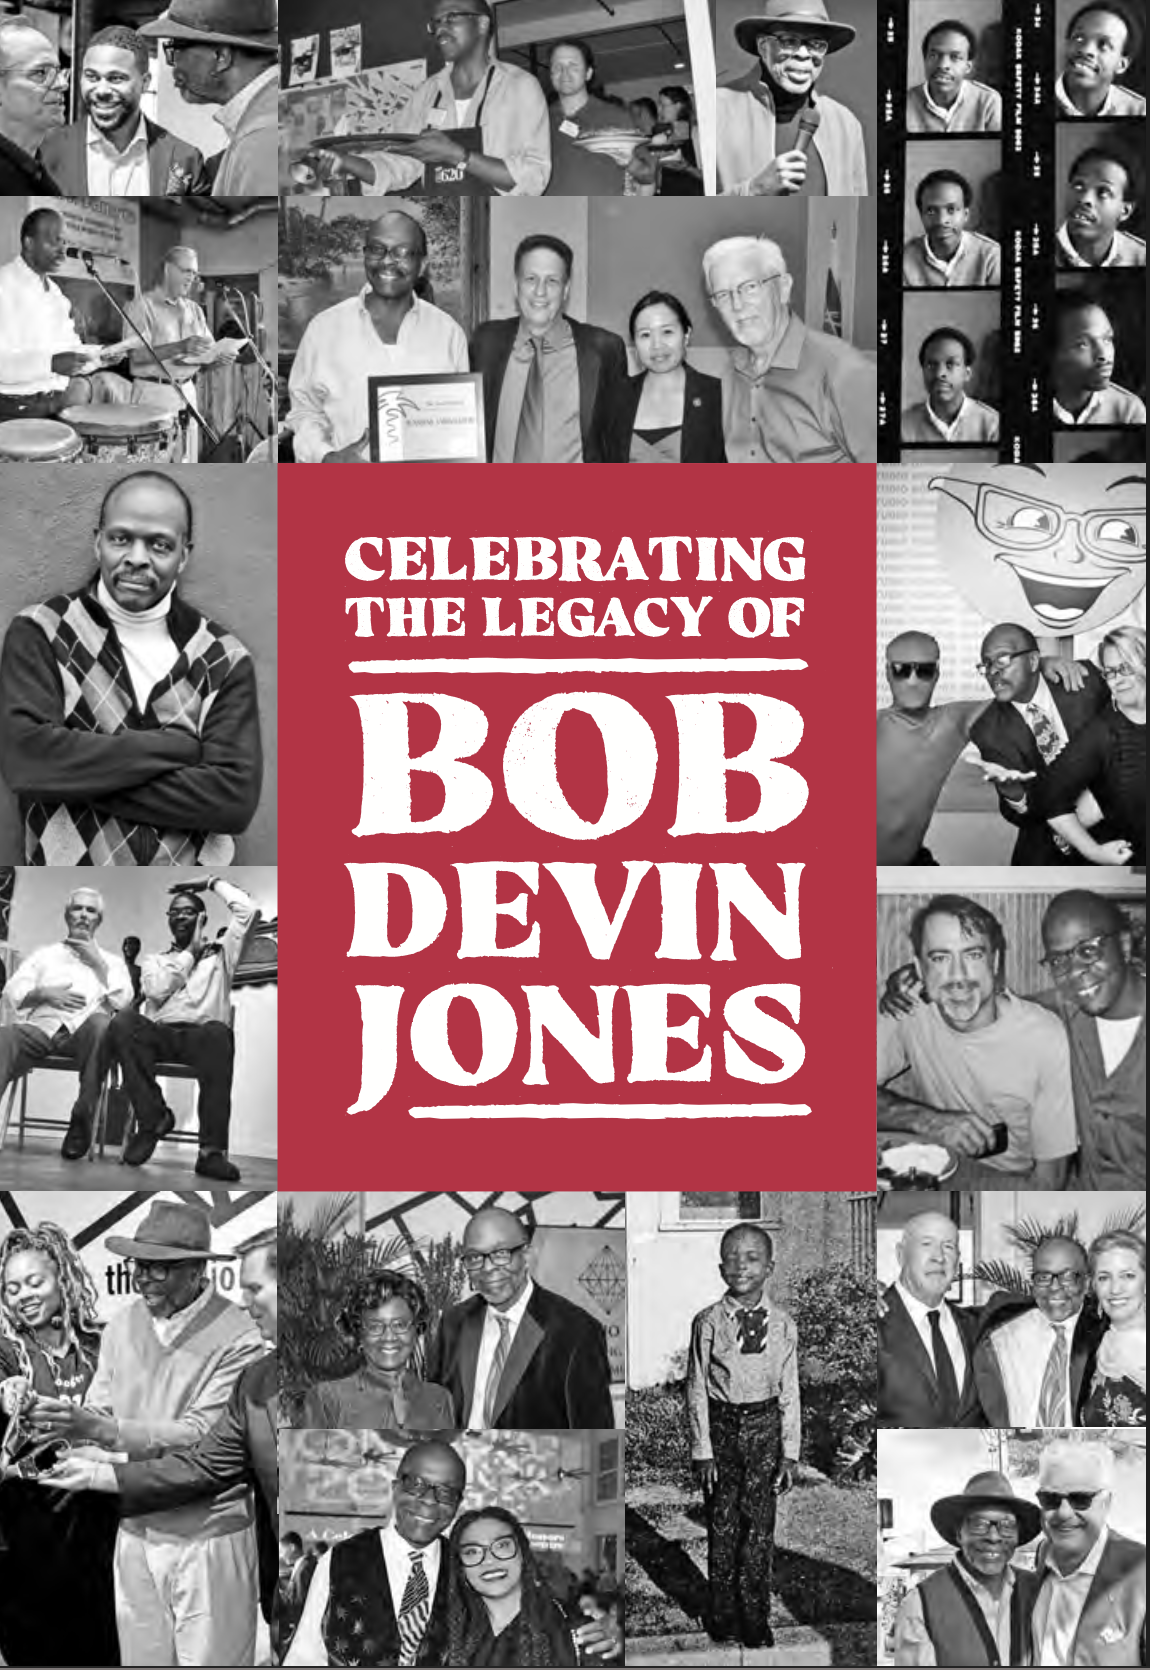 Celebrating the legend and the legacy of Bob Devin Jones